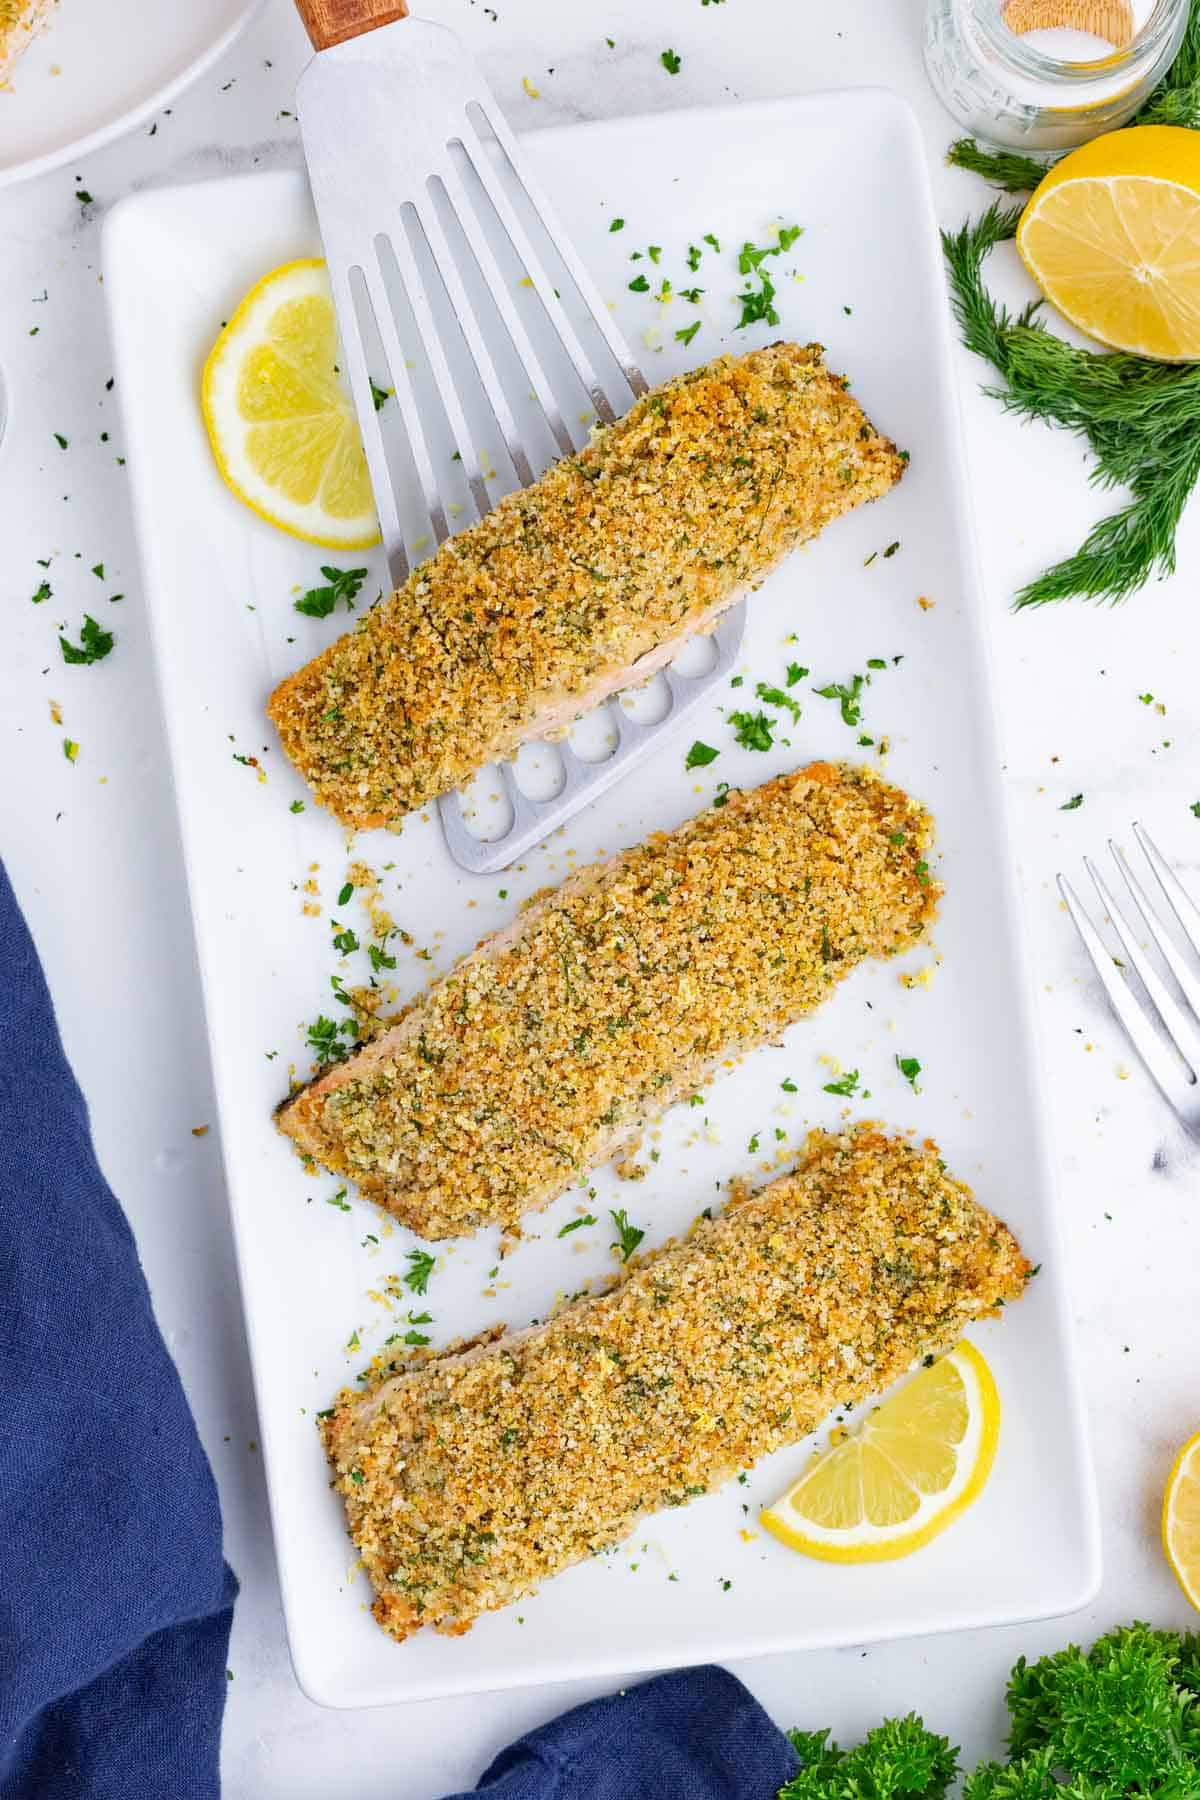 Four salmon filets with panko breadcrumbs on top are spread on a serving dish.